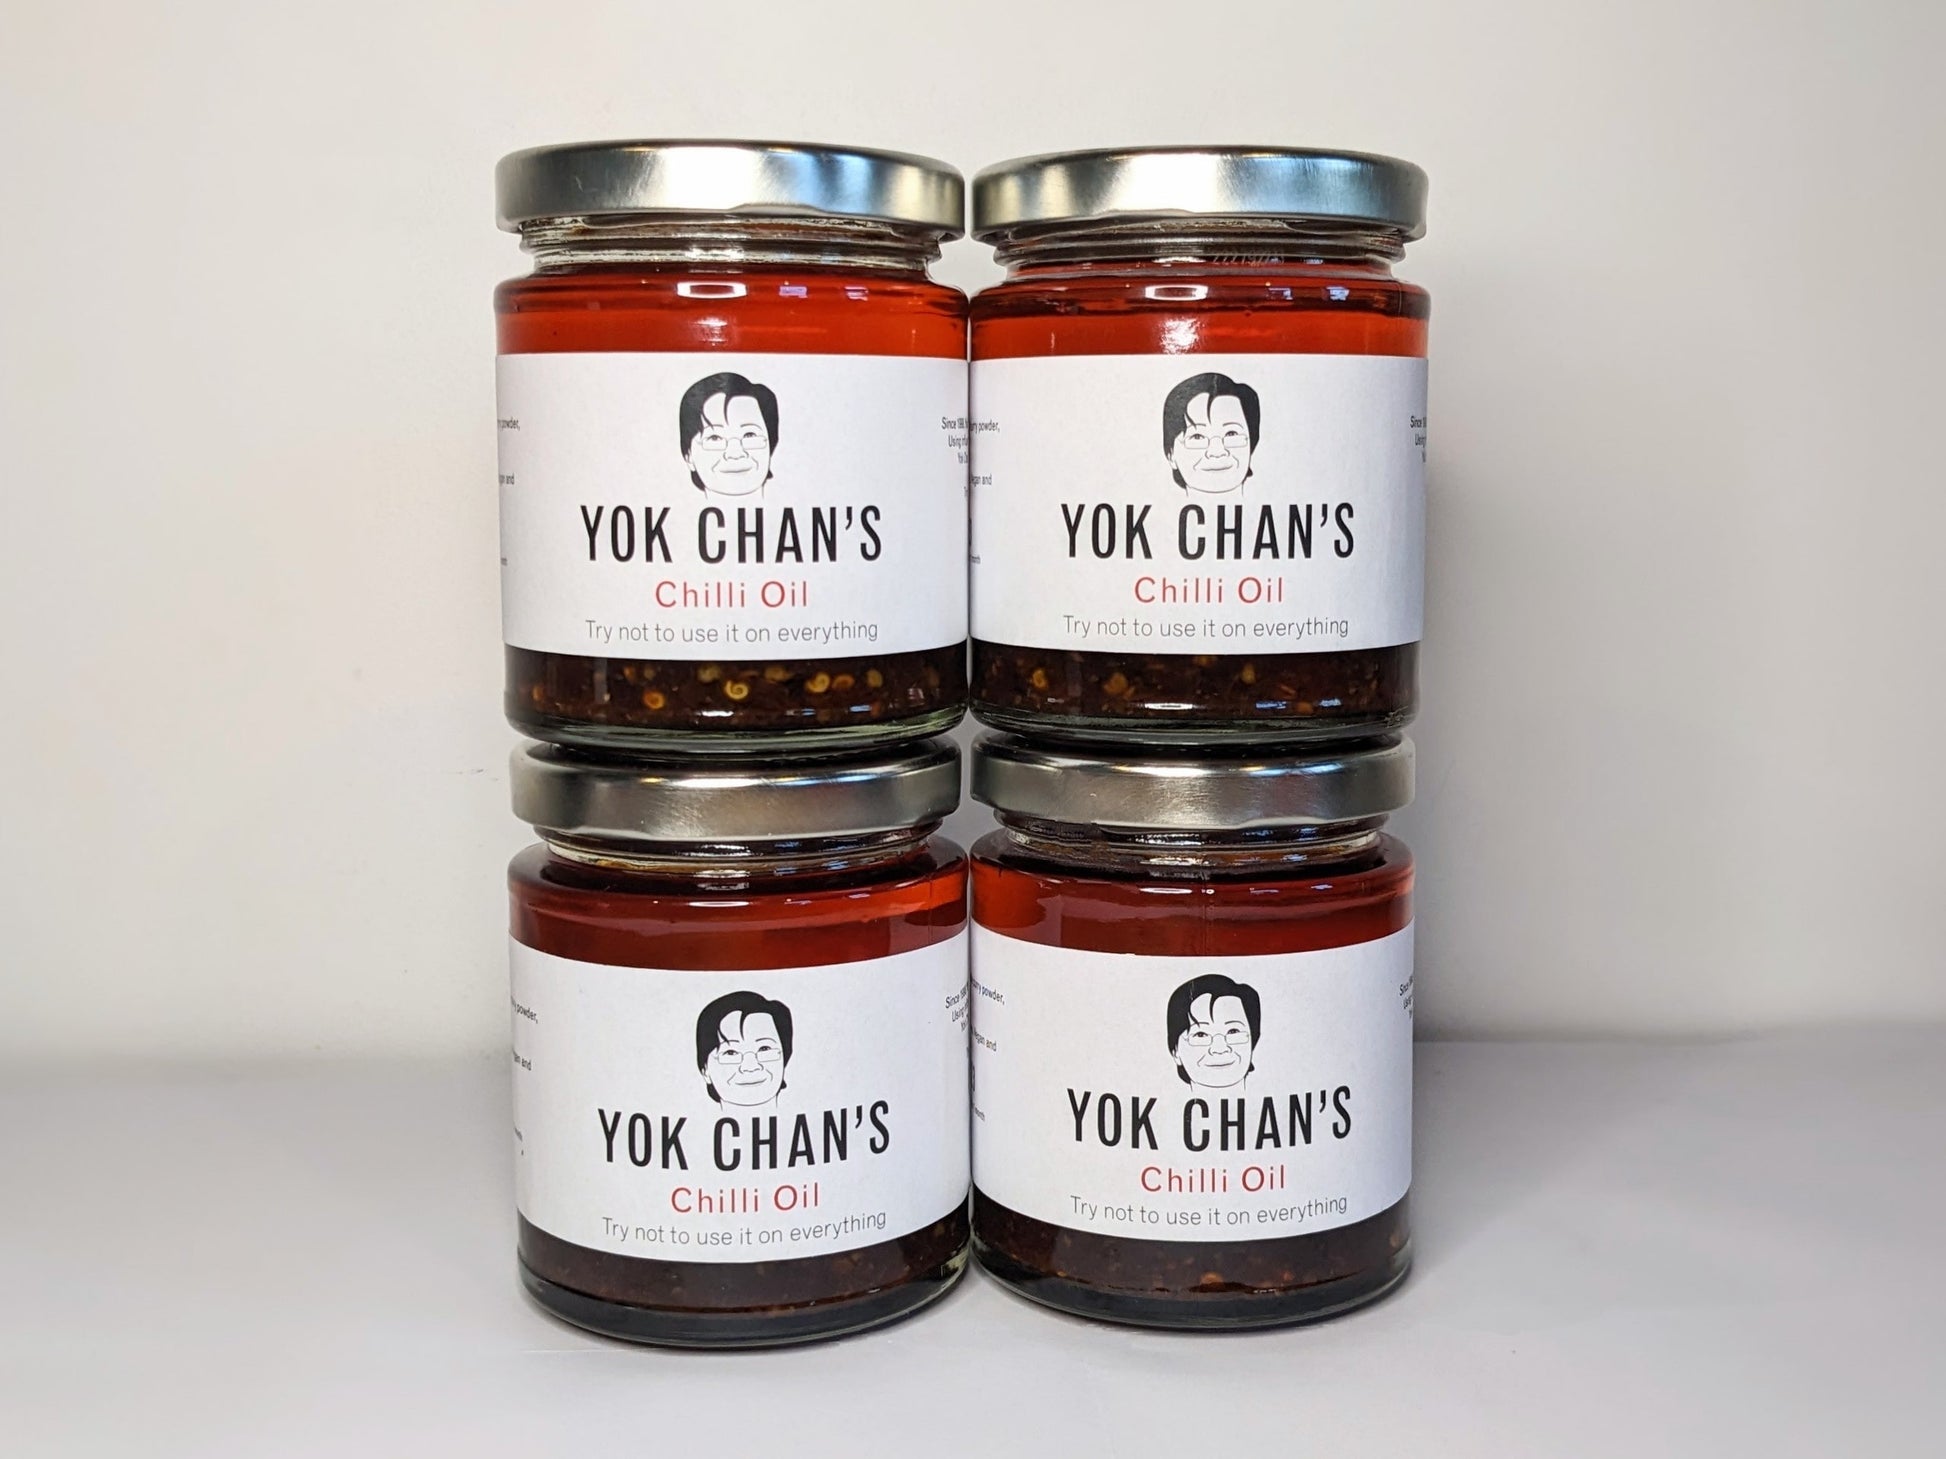 Four jars of Yok Chan's Chilli Oil stacked